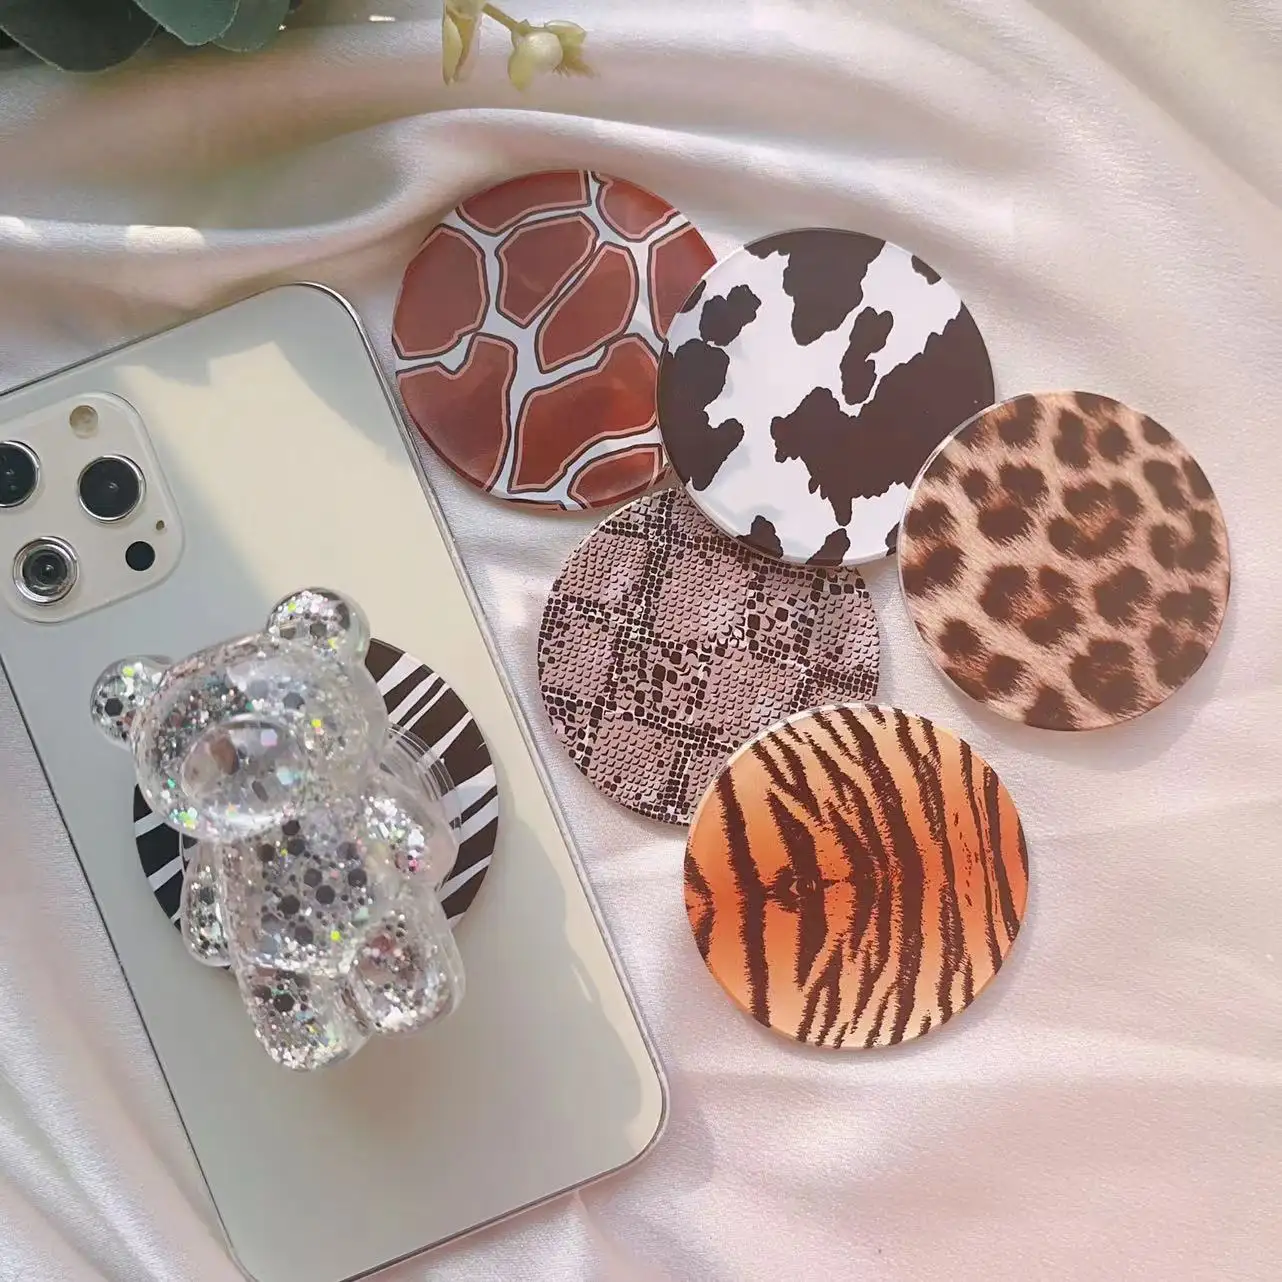 Niche Leopard Print Painted Magnetic Ring Chassis Stand For Smart Phone Wireless Charging Macsafe Magnetic Grip Ring Holder